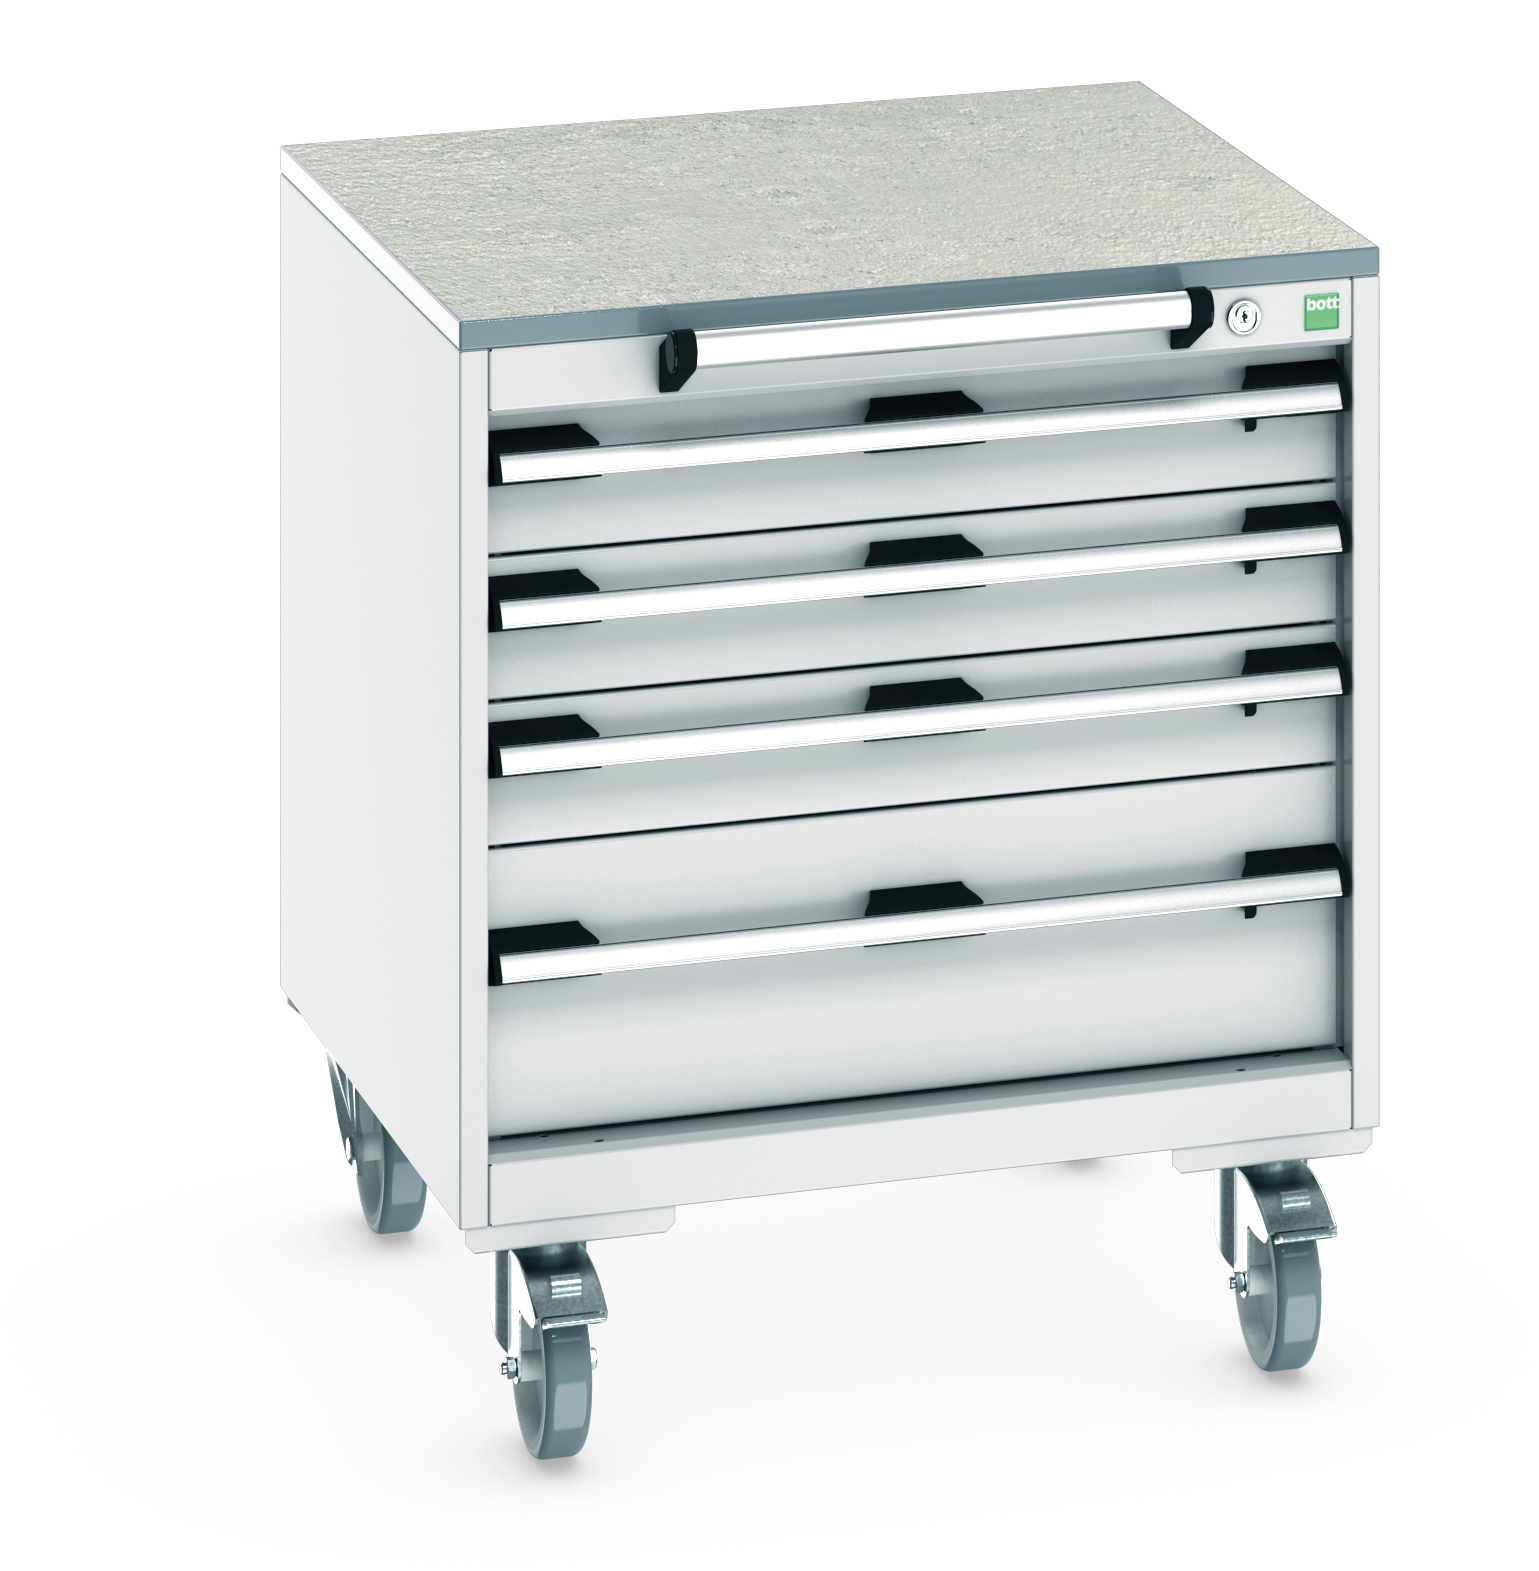 Bott Cubio Mobile Drawer Cabinet With 4 Drawers & Lino Worktop - 40402144.16V